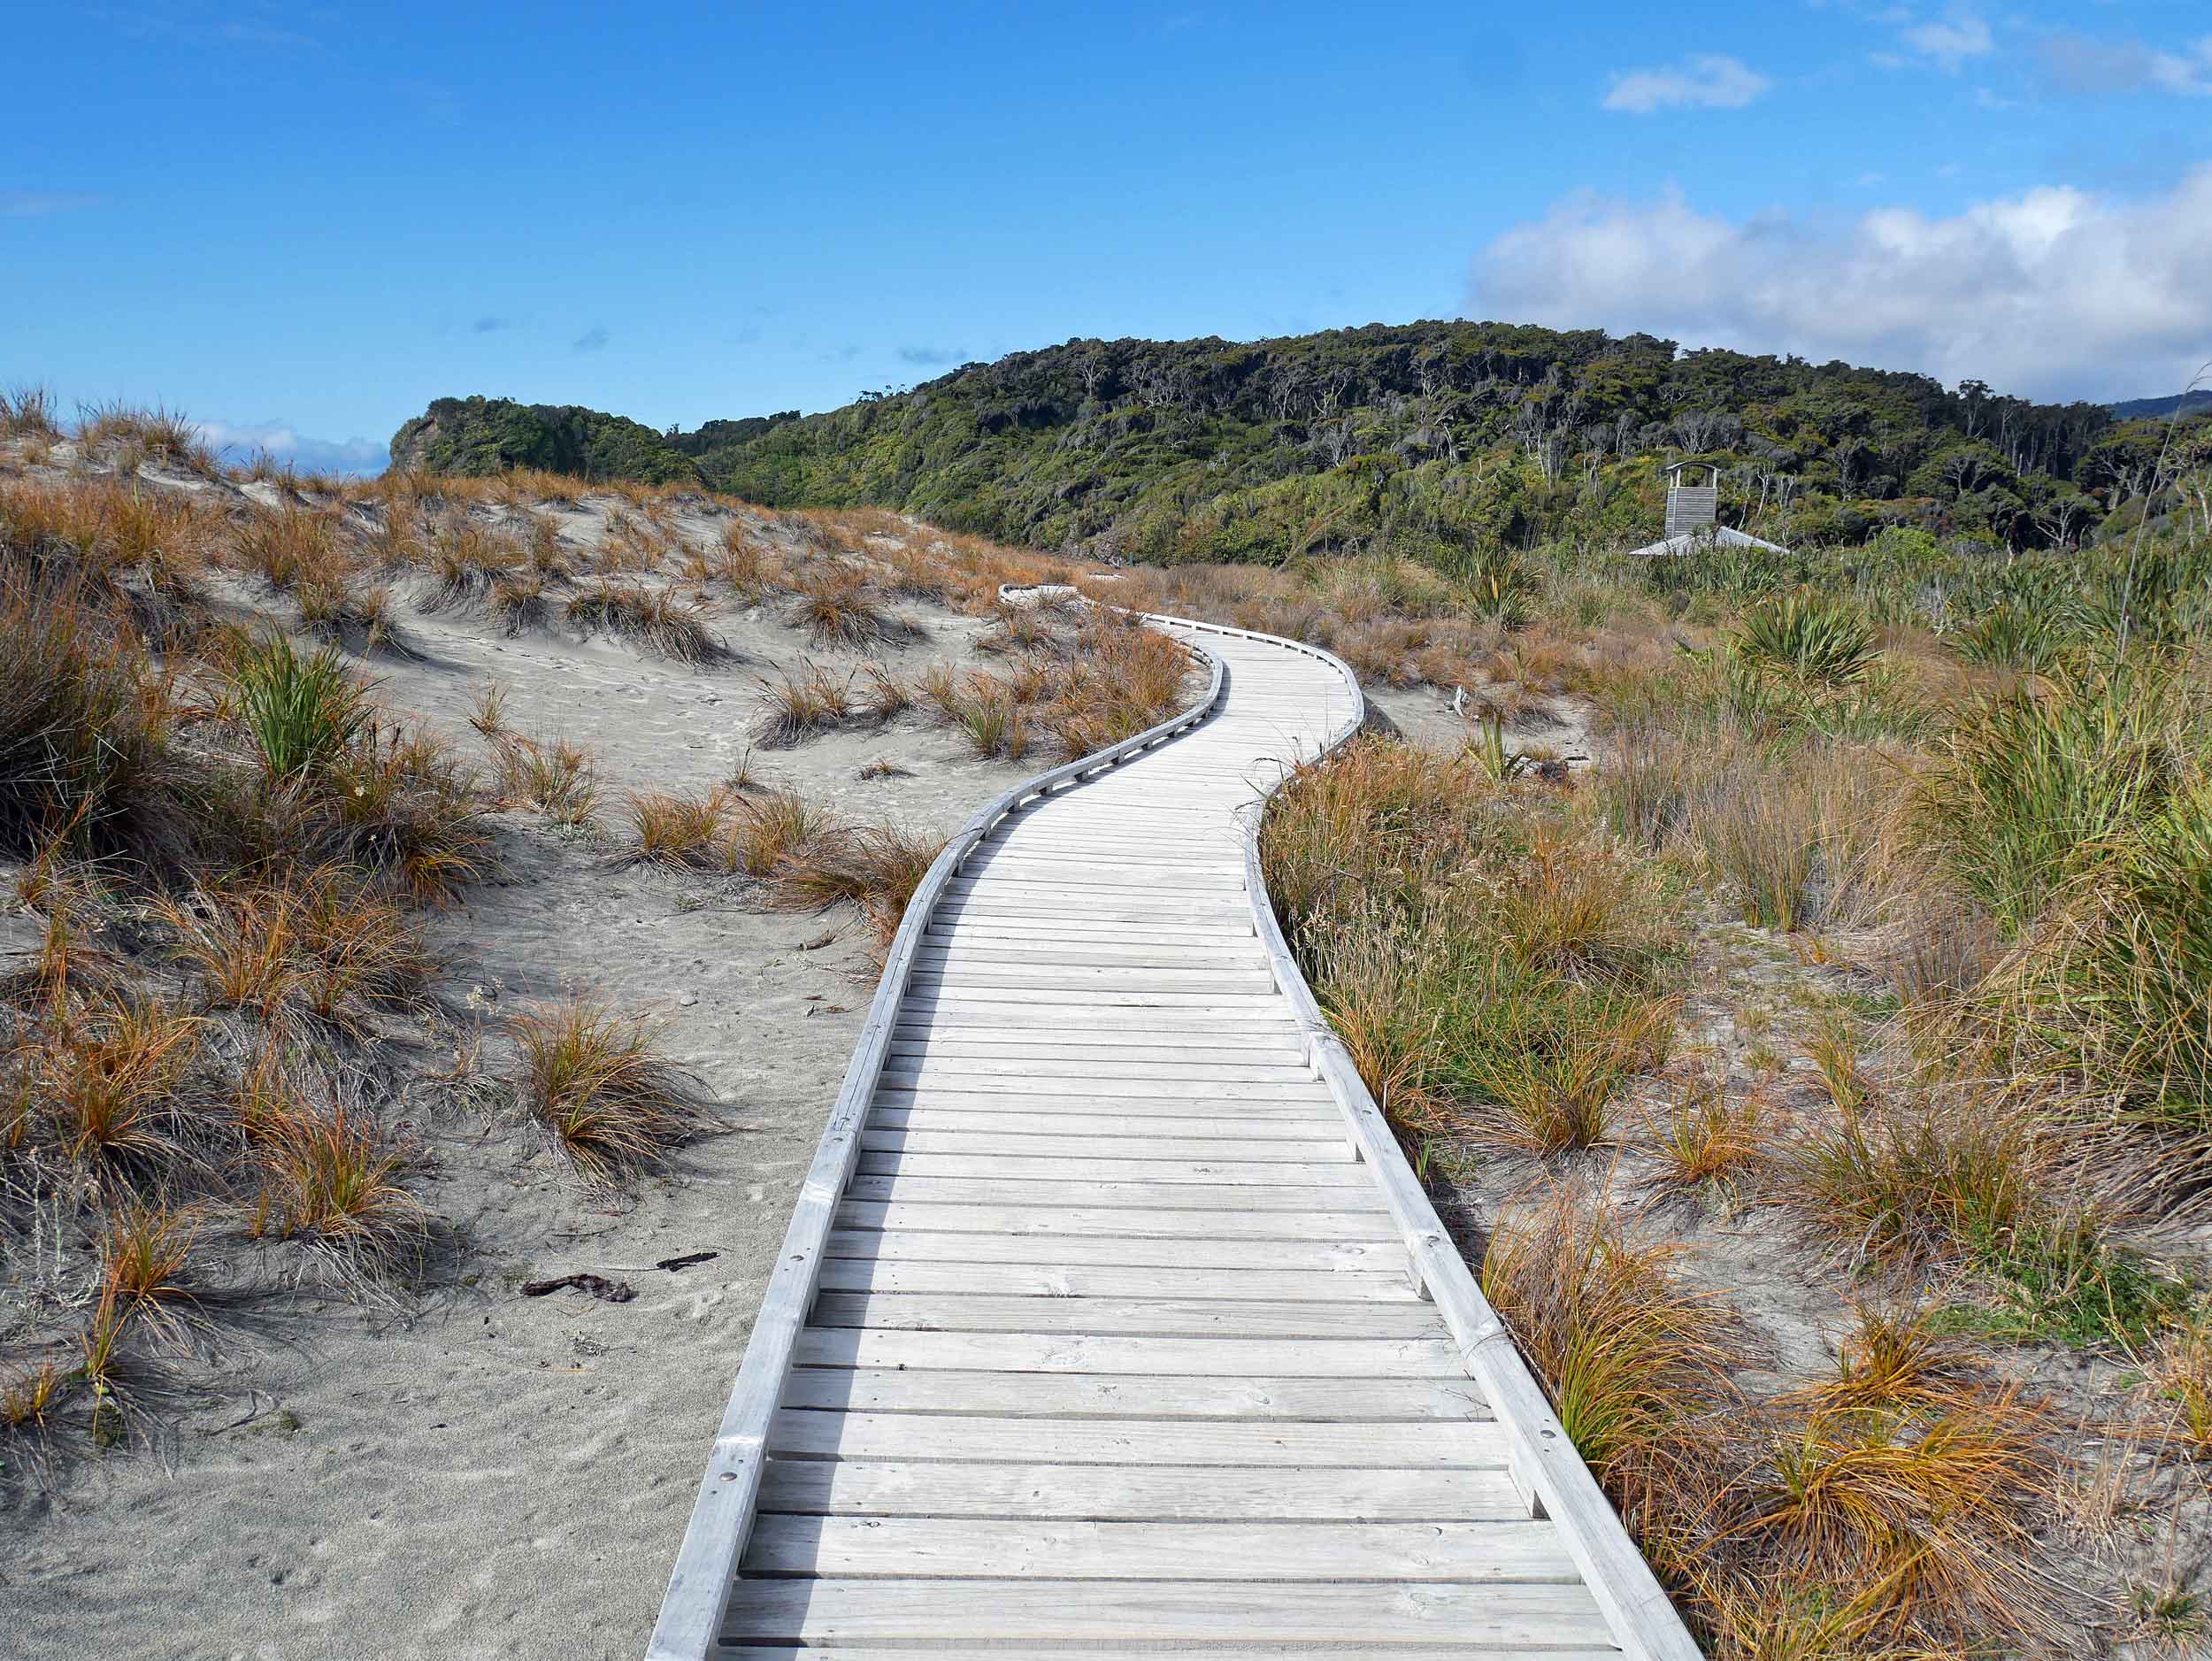  A scenic walk through the Ship Creek dunes with sea grass, driftwood and rocky sands (Jan 5).&nbsp; 